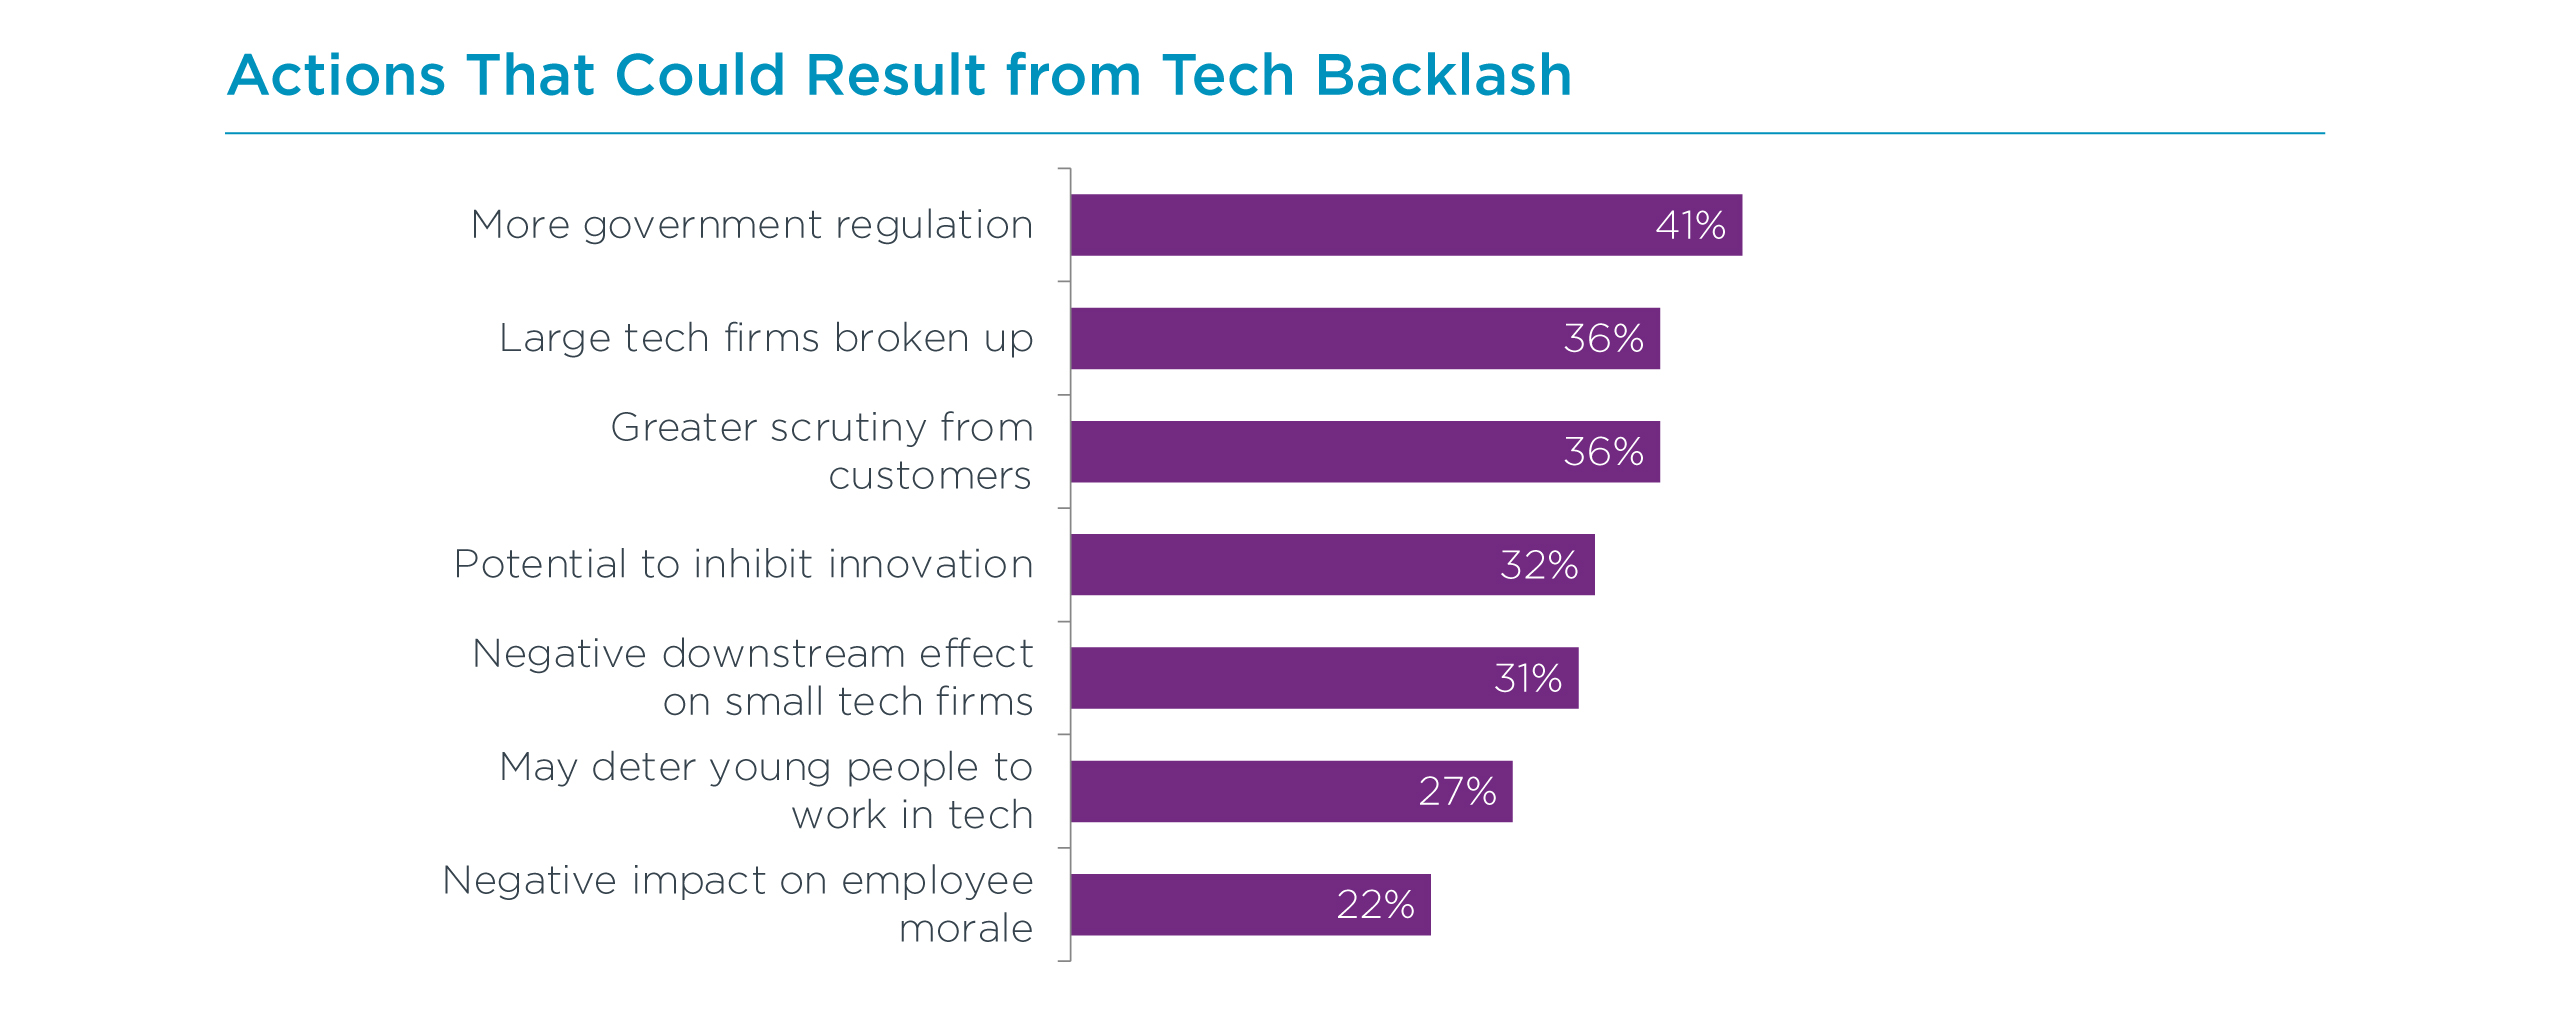 Actions That Could Result from Tech Backlash